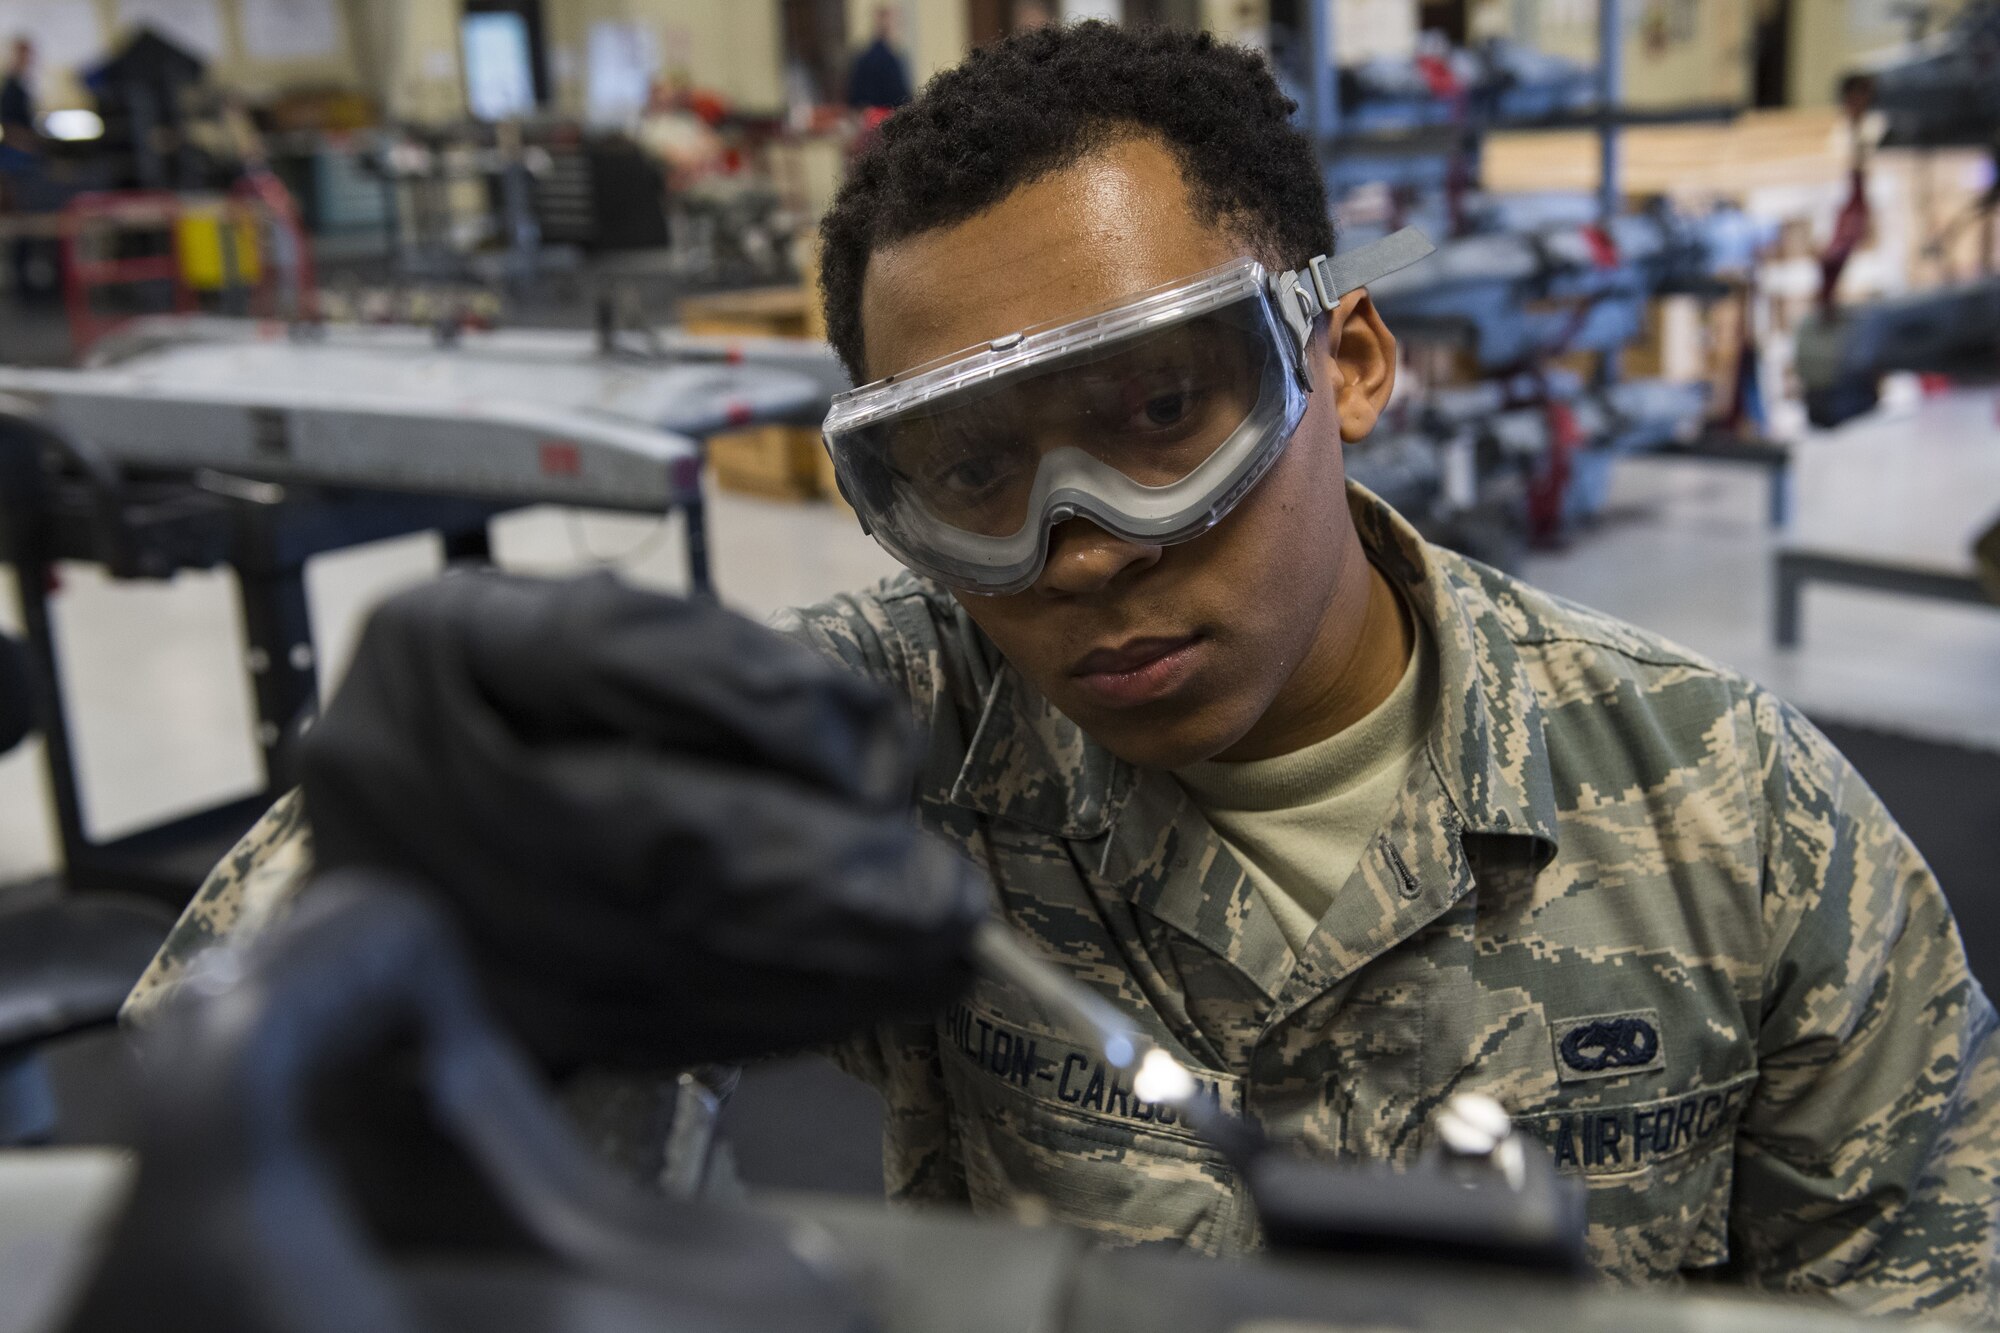 Airman 1st Class DeAndre Hilton-Cardoza, 23d Maintenance Squadron armament apprentice, paints metal elements with anti-corrosion spray, Jan. 10, 2018, at Moody Air Force Base, Ga. Moody’s armament flight is responsible for maintaining all of the aircraft weapons systems components when they're removed from the aircraft. This includes gun systems, alternate mission equipment and bomb racks. (U.S. Air Force photo by Senior Airman Janiqua P. Robinson)